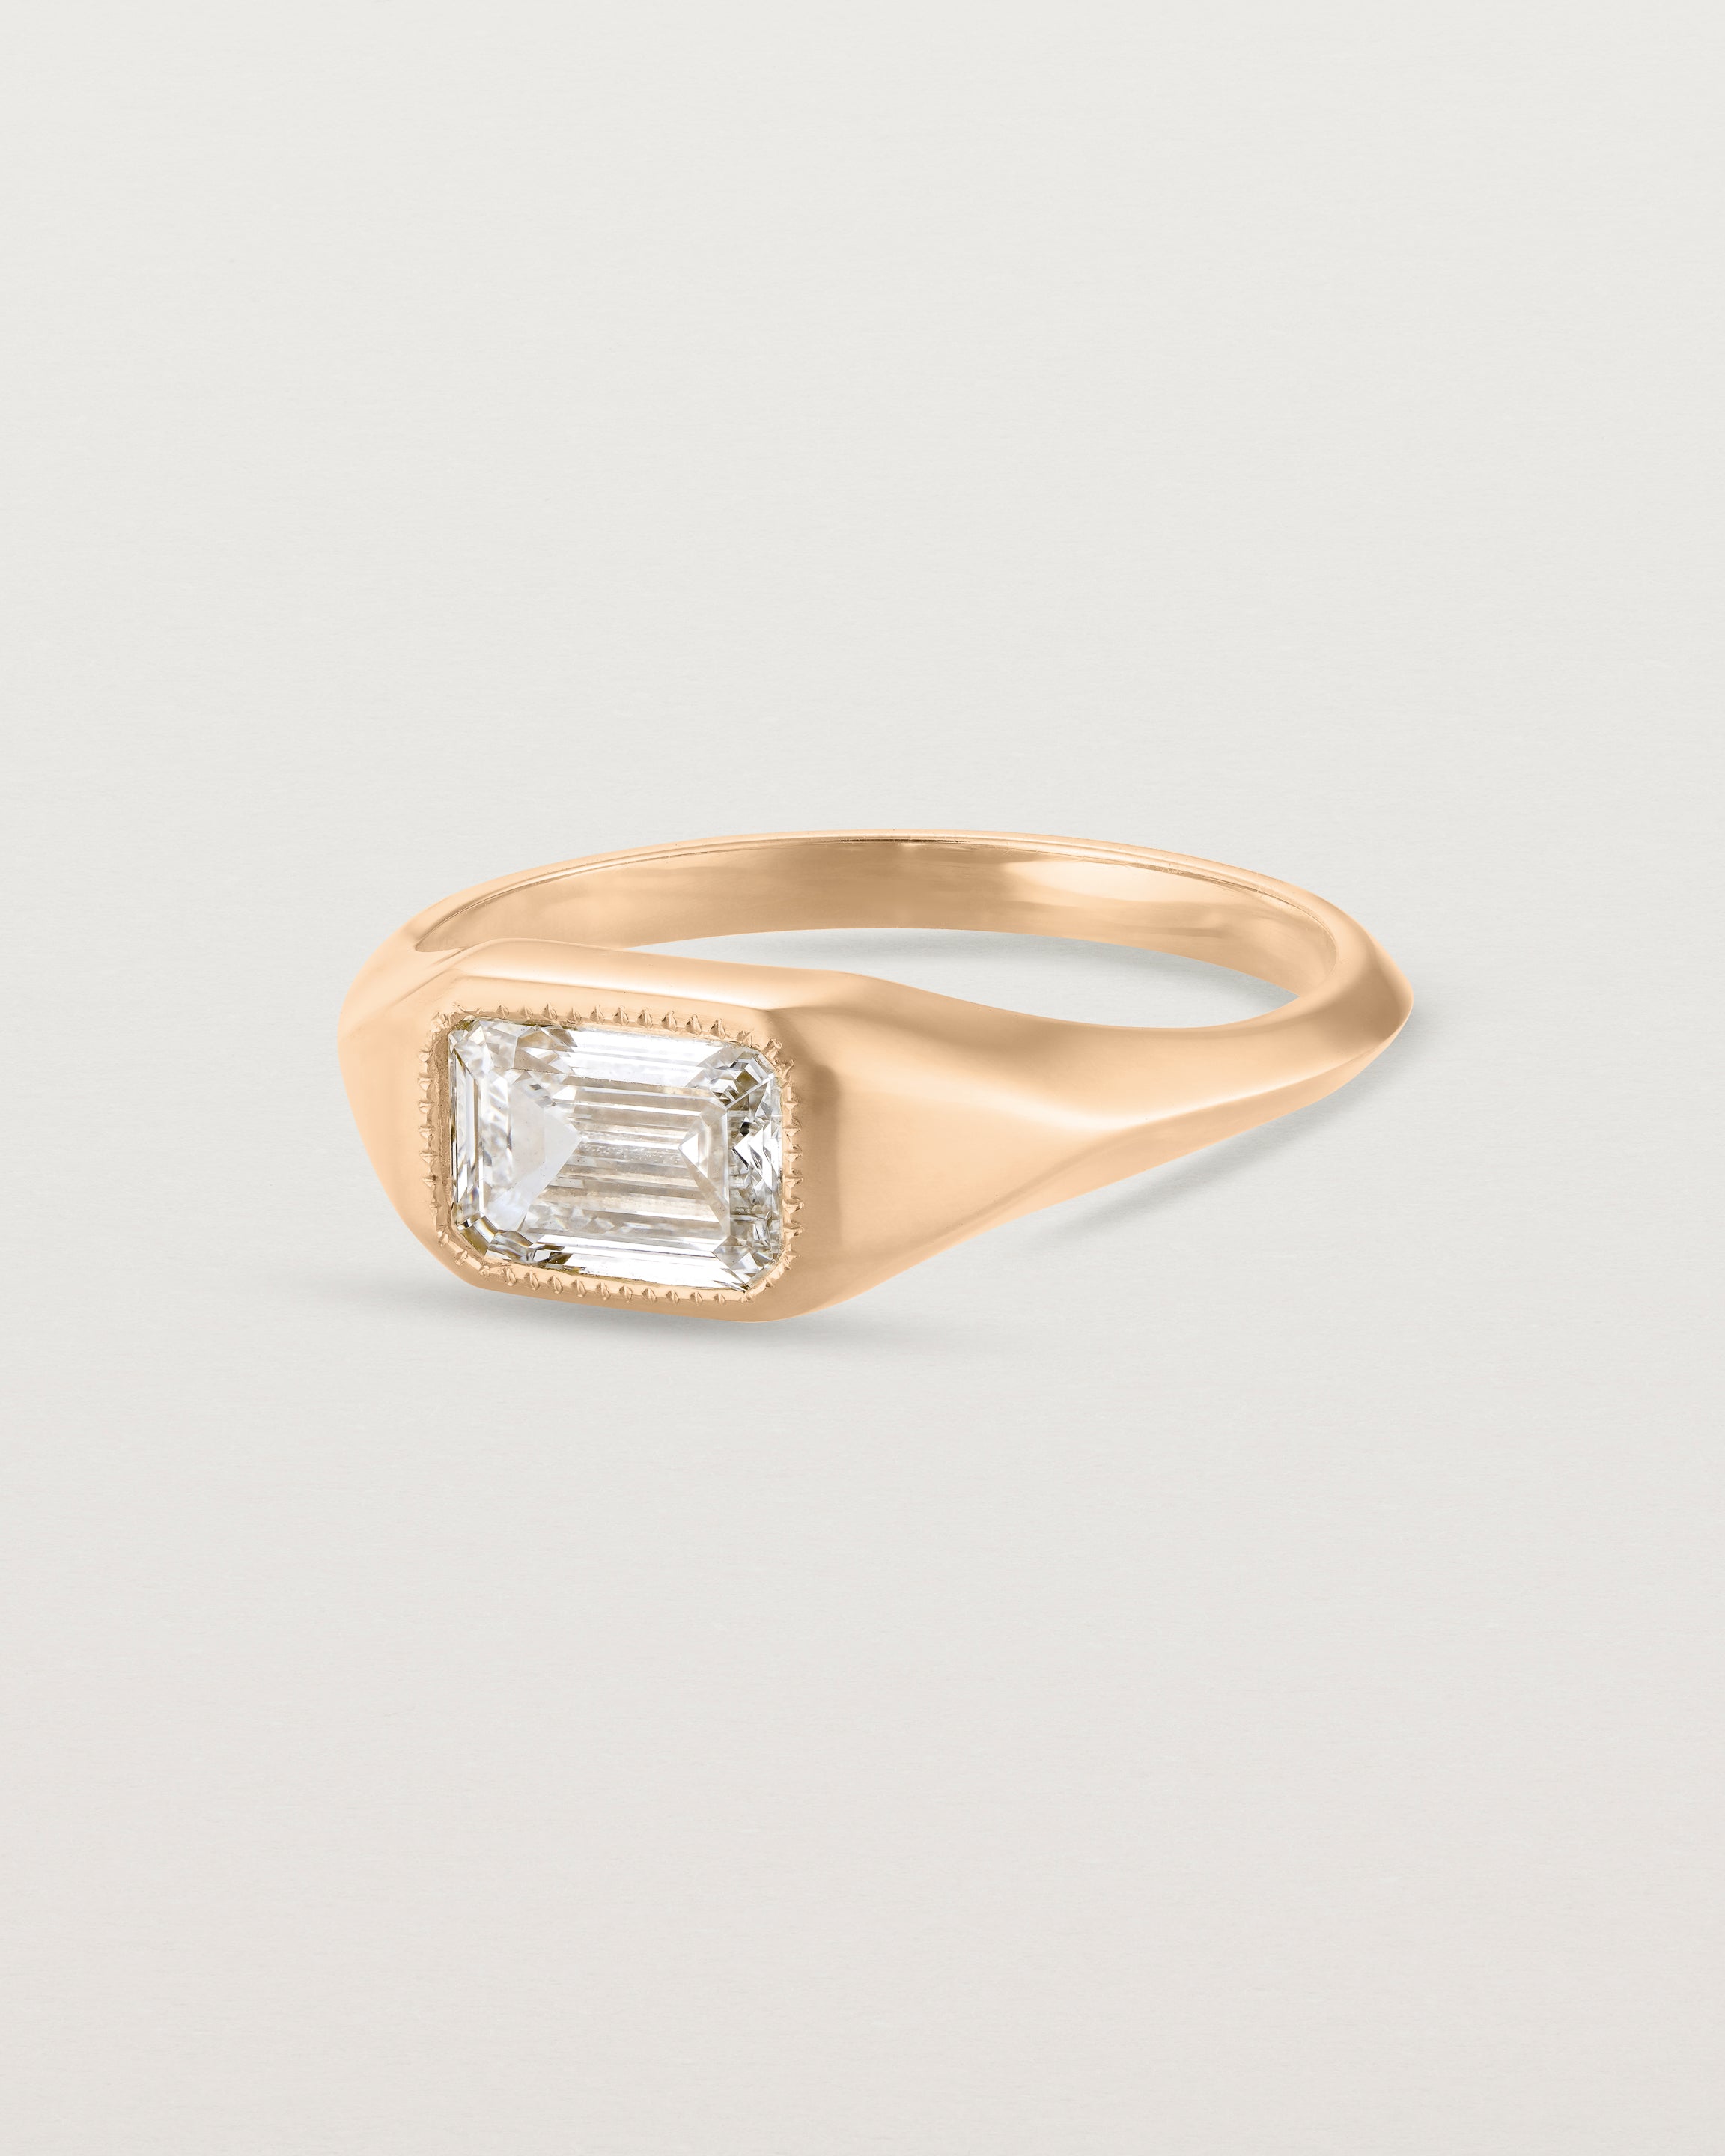 Angled view of the Átlas Emerald Signet | Laboratory Grown Diamond in rose gold with a polished finish.